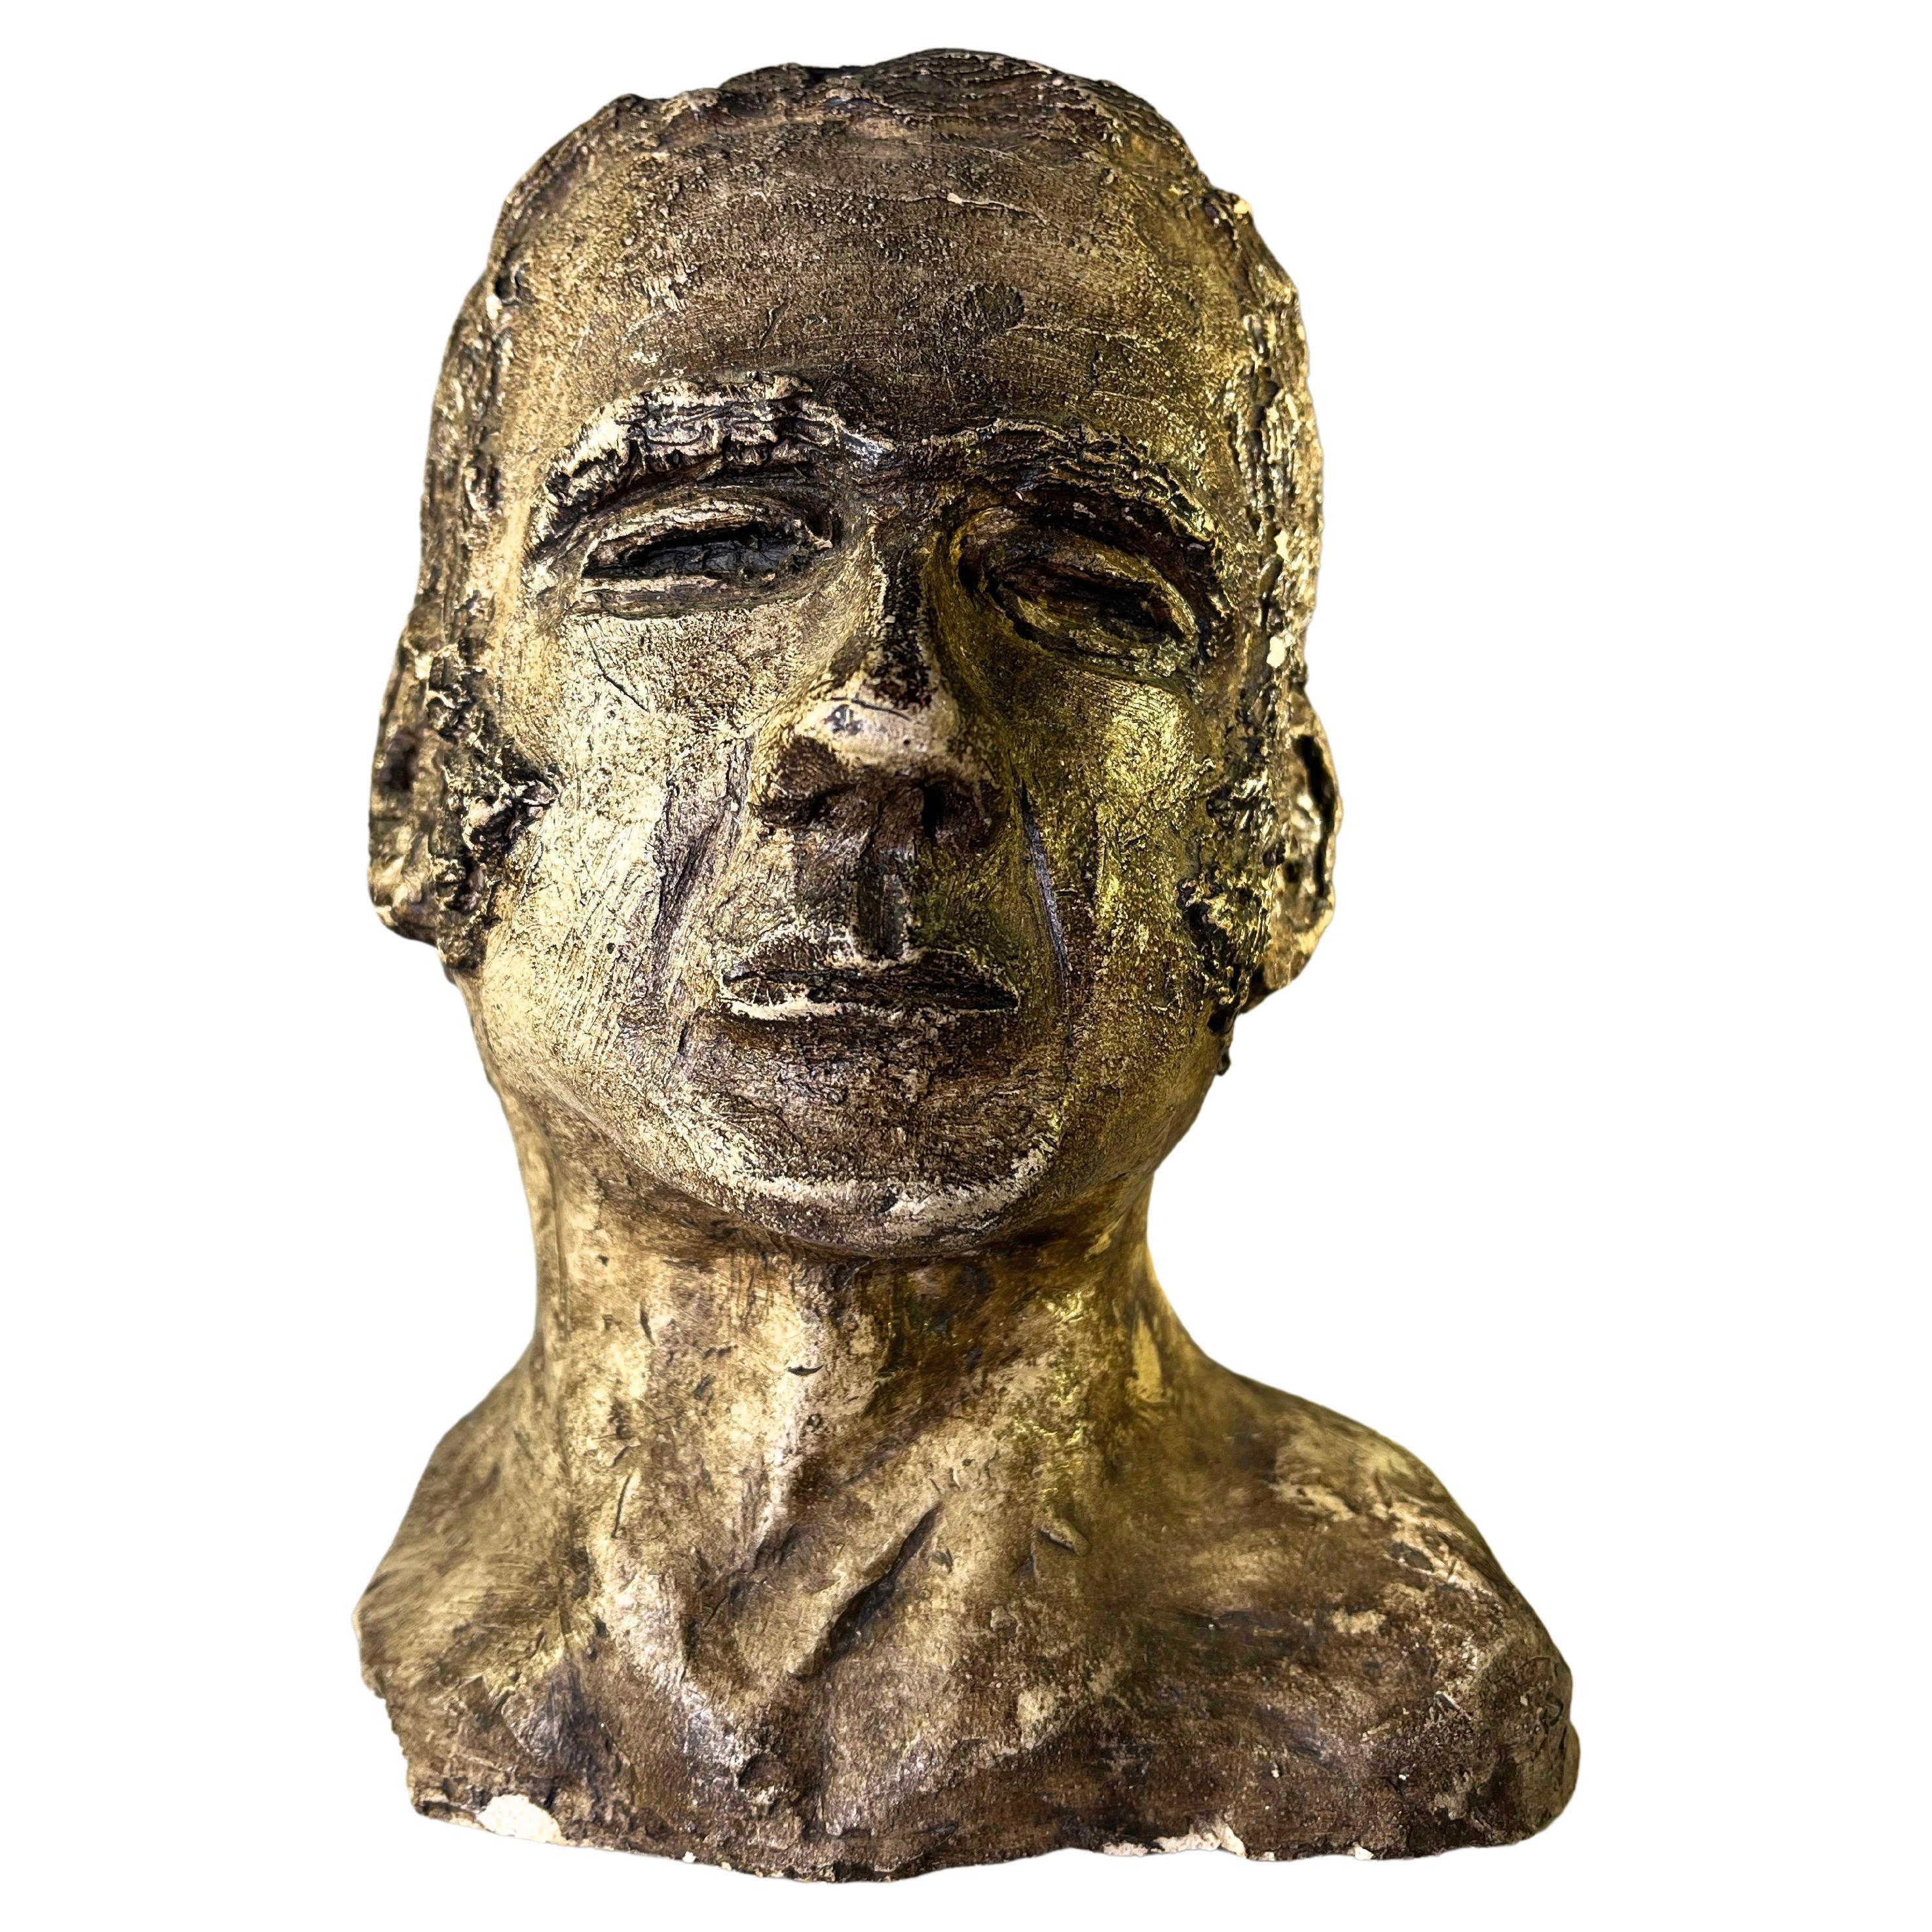 Strikingly Powerful, Vintage Clay Sculpture Bust Of A South American Macho Male For Sale